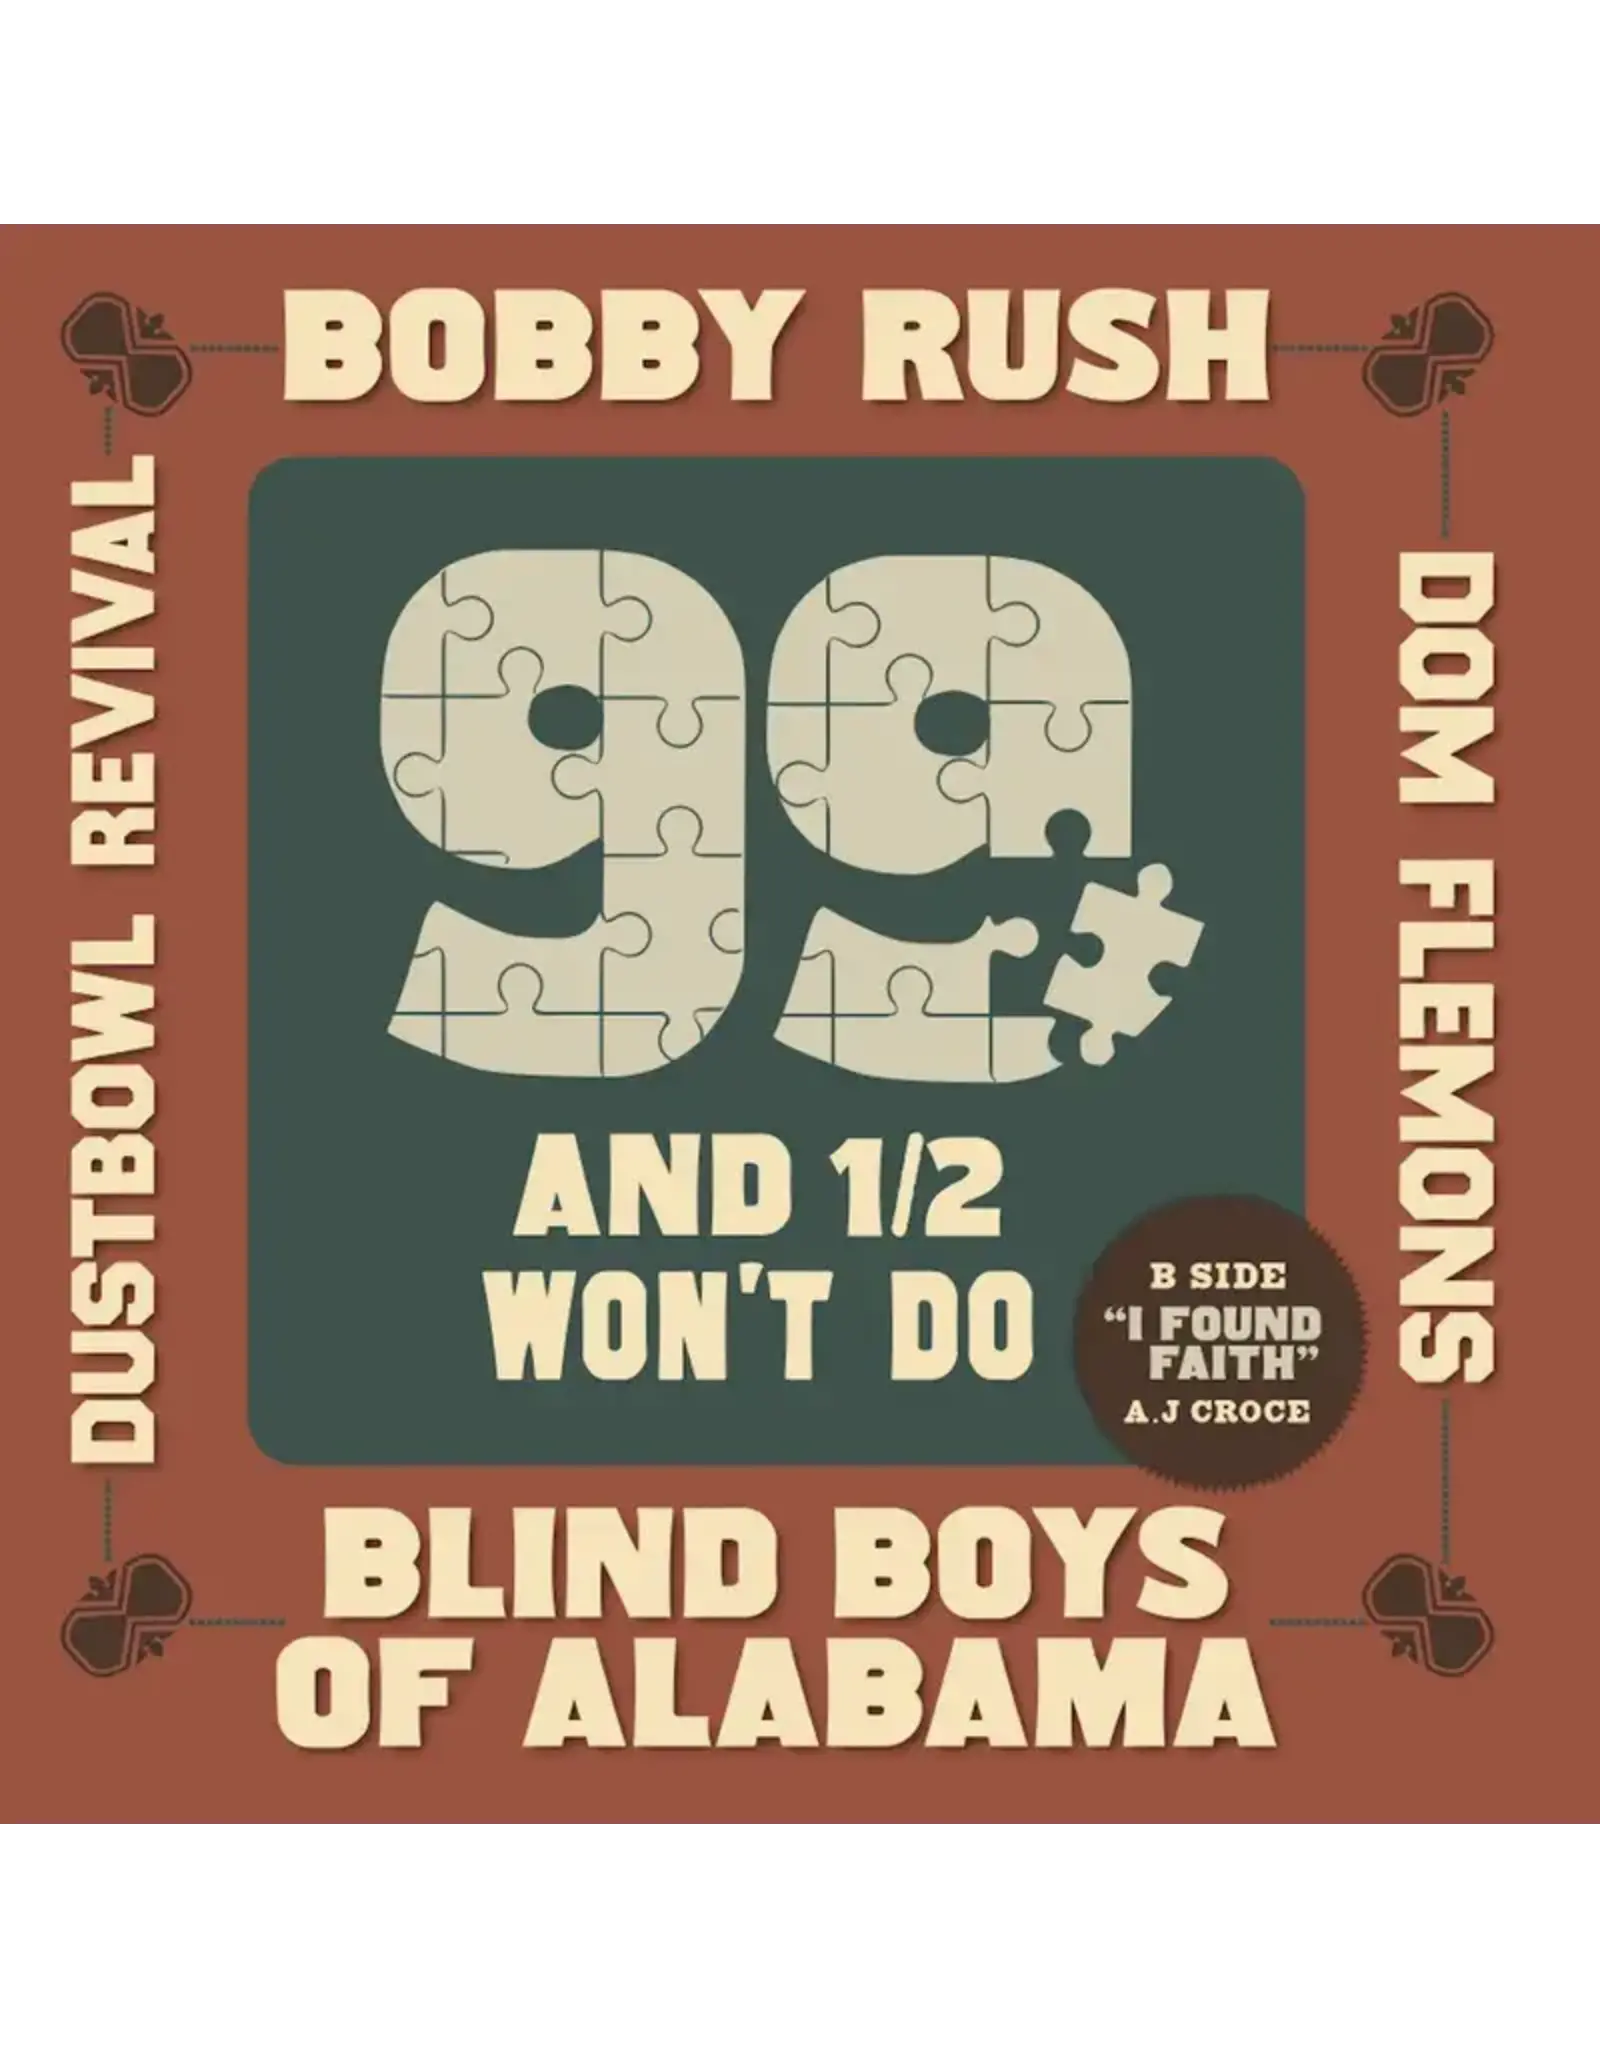 Bobby Rush / Blind Boys Of Alabama / Dom Flemons / Dustbowl Revival - 99 and 1/2 Won't Do (Record Store Day) [7" Vinyl]